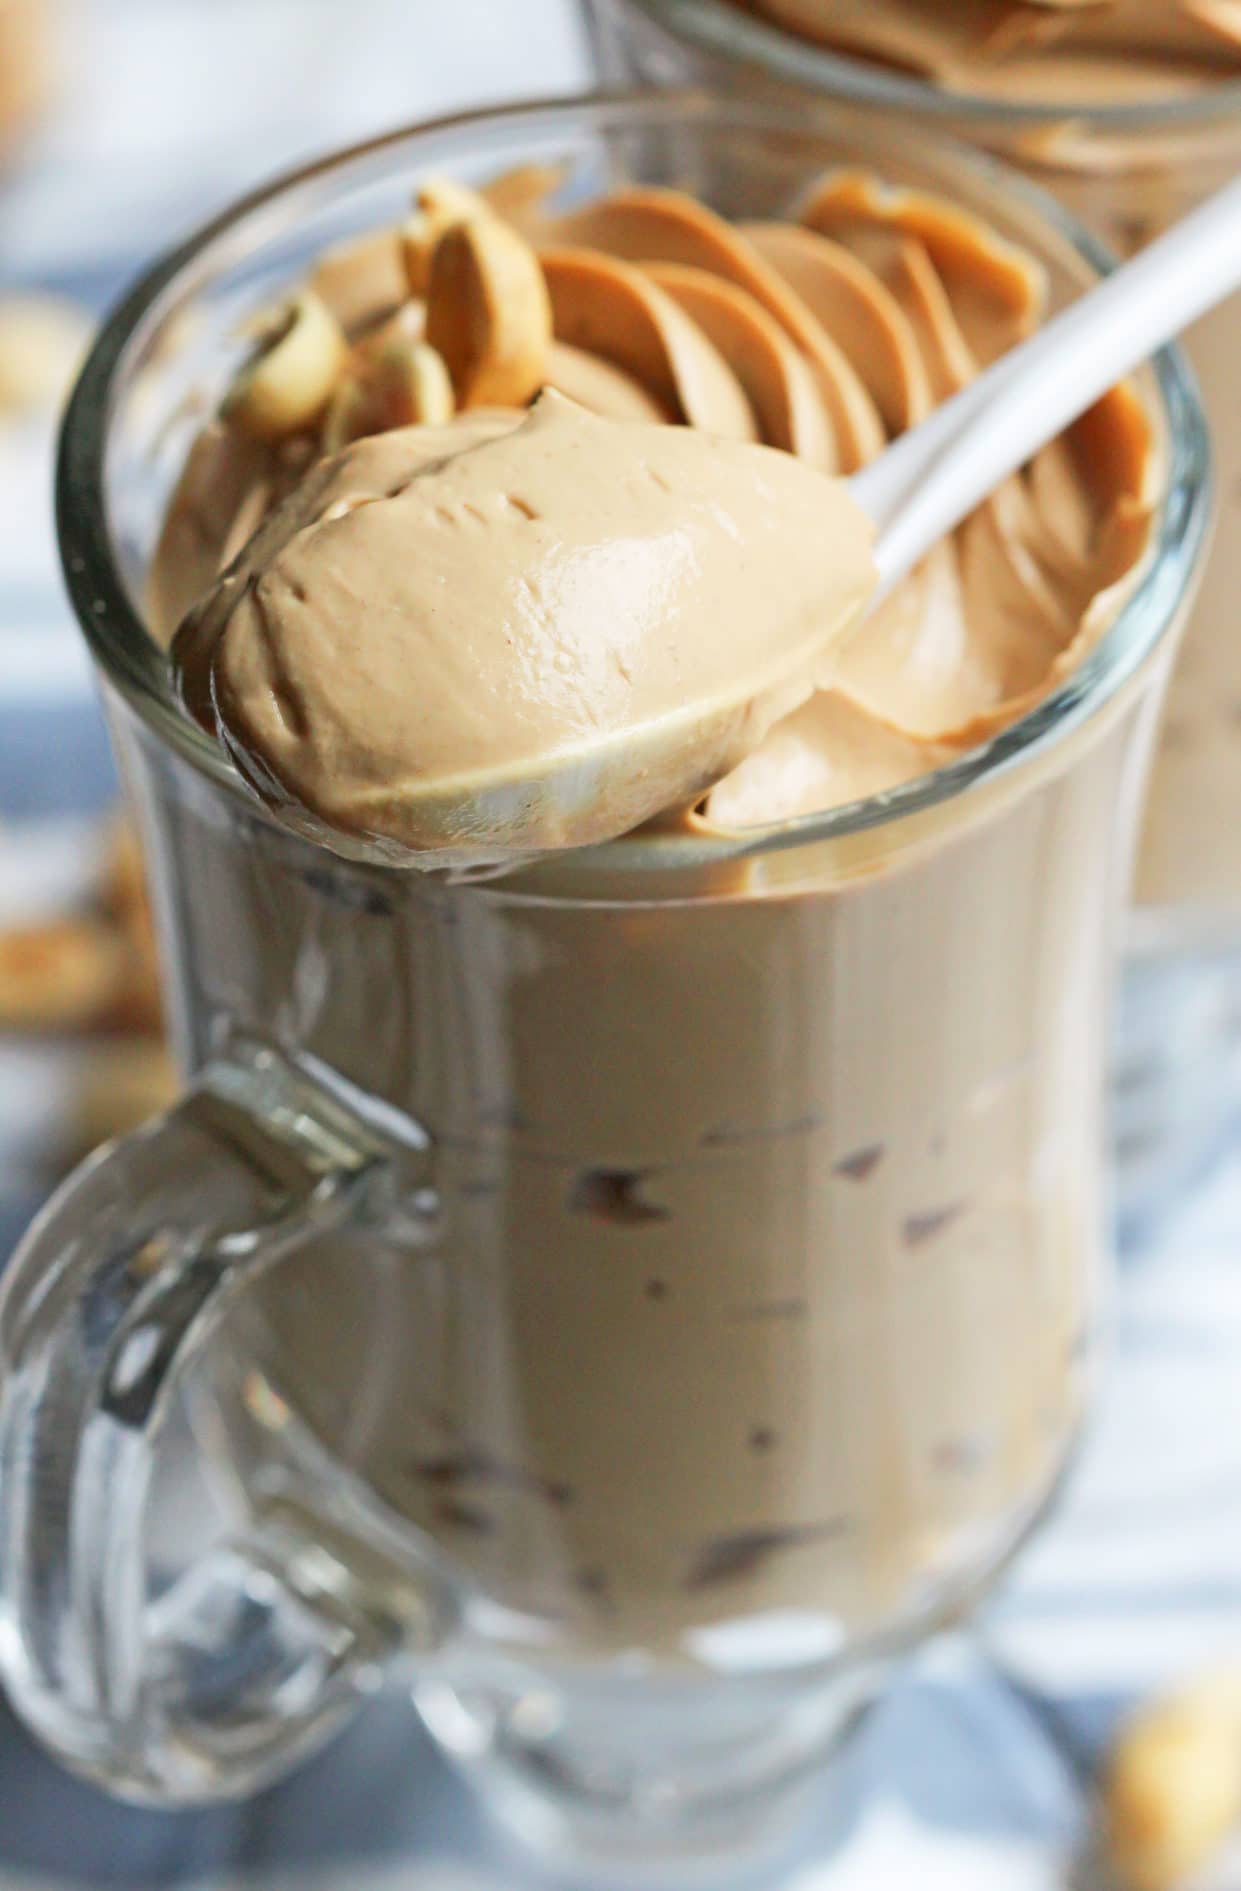 This rich and decadent Healthy Peanut Butter Mousse recipe is secretly guilt free, sugar free, low carb, high protein, gluten free, dairy free, AND vegan! -- Healthy Dessert Recipes at Desserts with Benefits